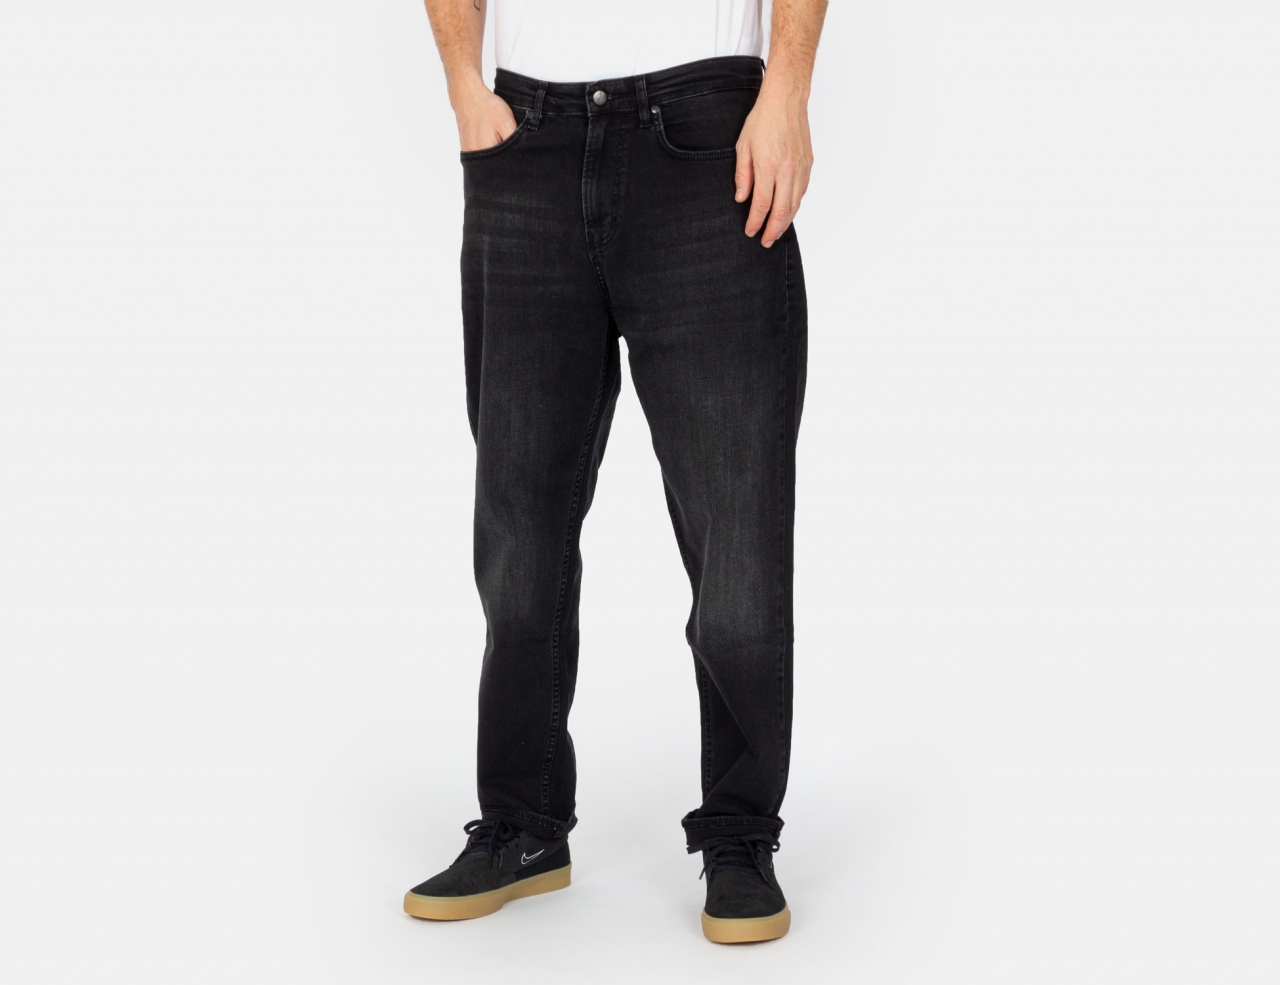 Reell Jeans Rave Jeans - Black Wash